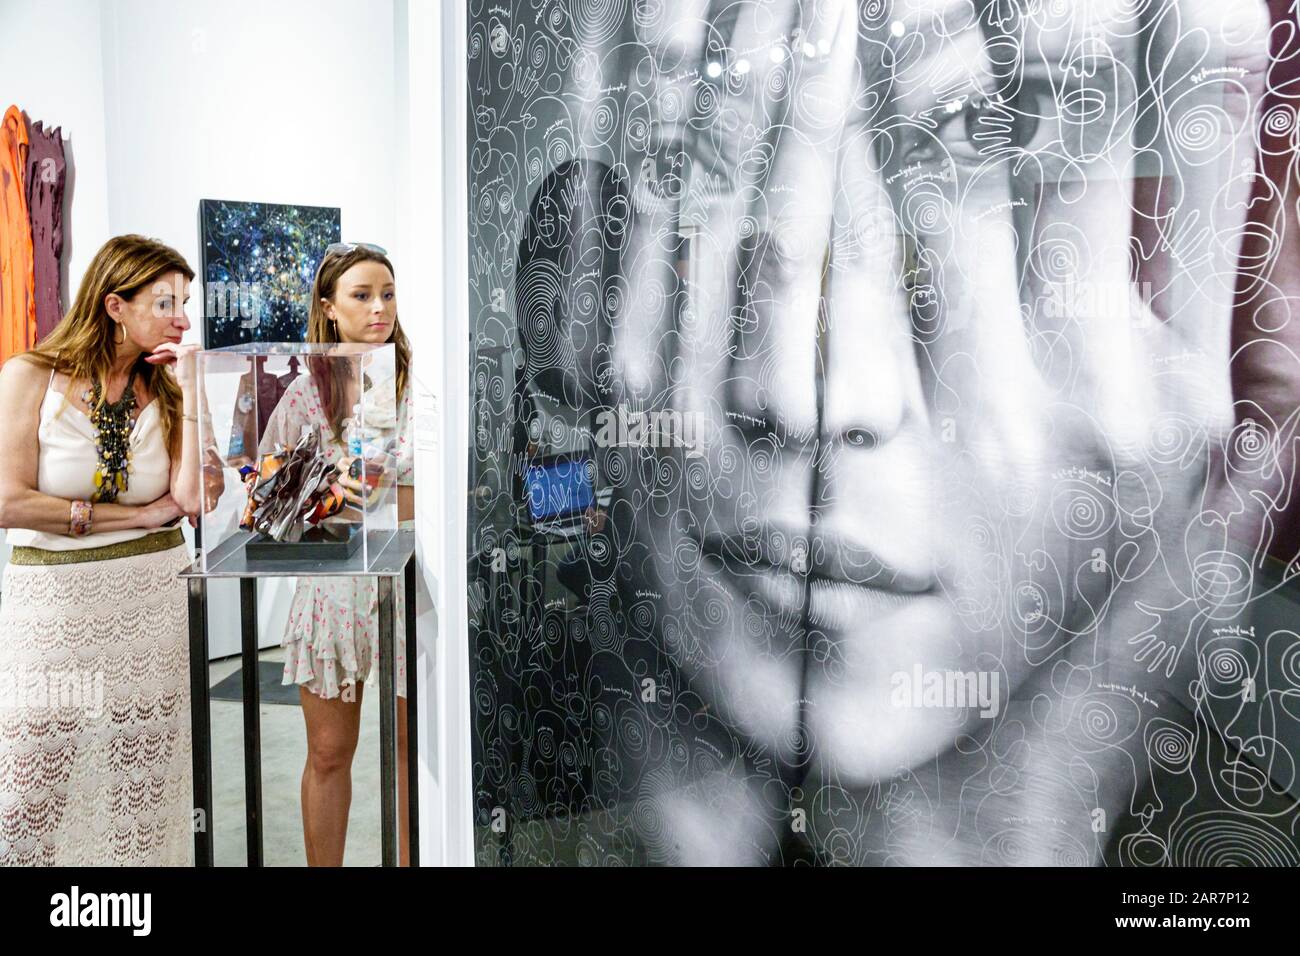 Miami Florida,Art Basel,Art Miami,inside interior,interior inside,gallery galleries exhibit exhibition collection,woman women female lady adult adults Stock Photo